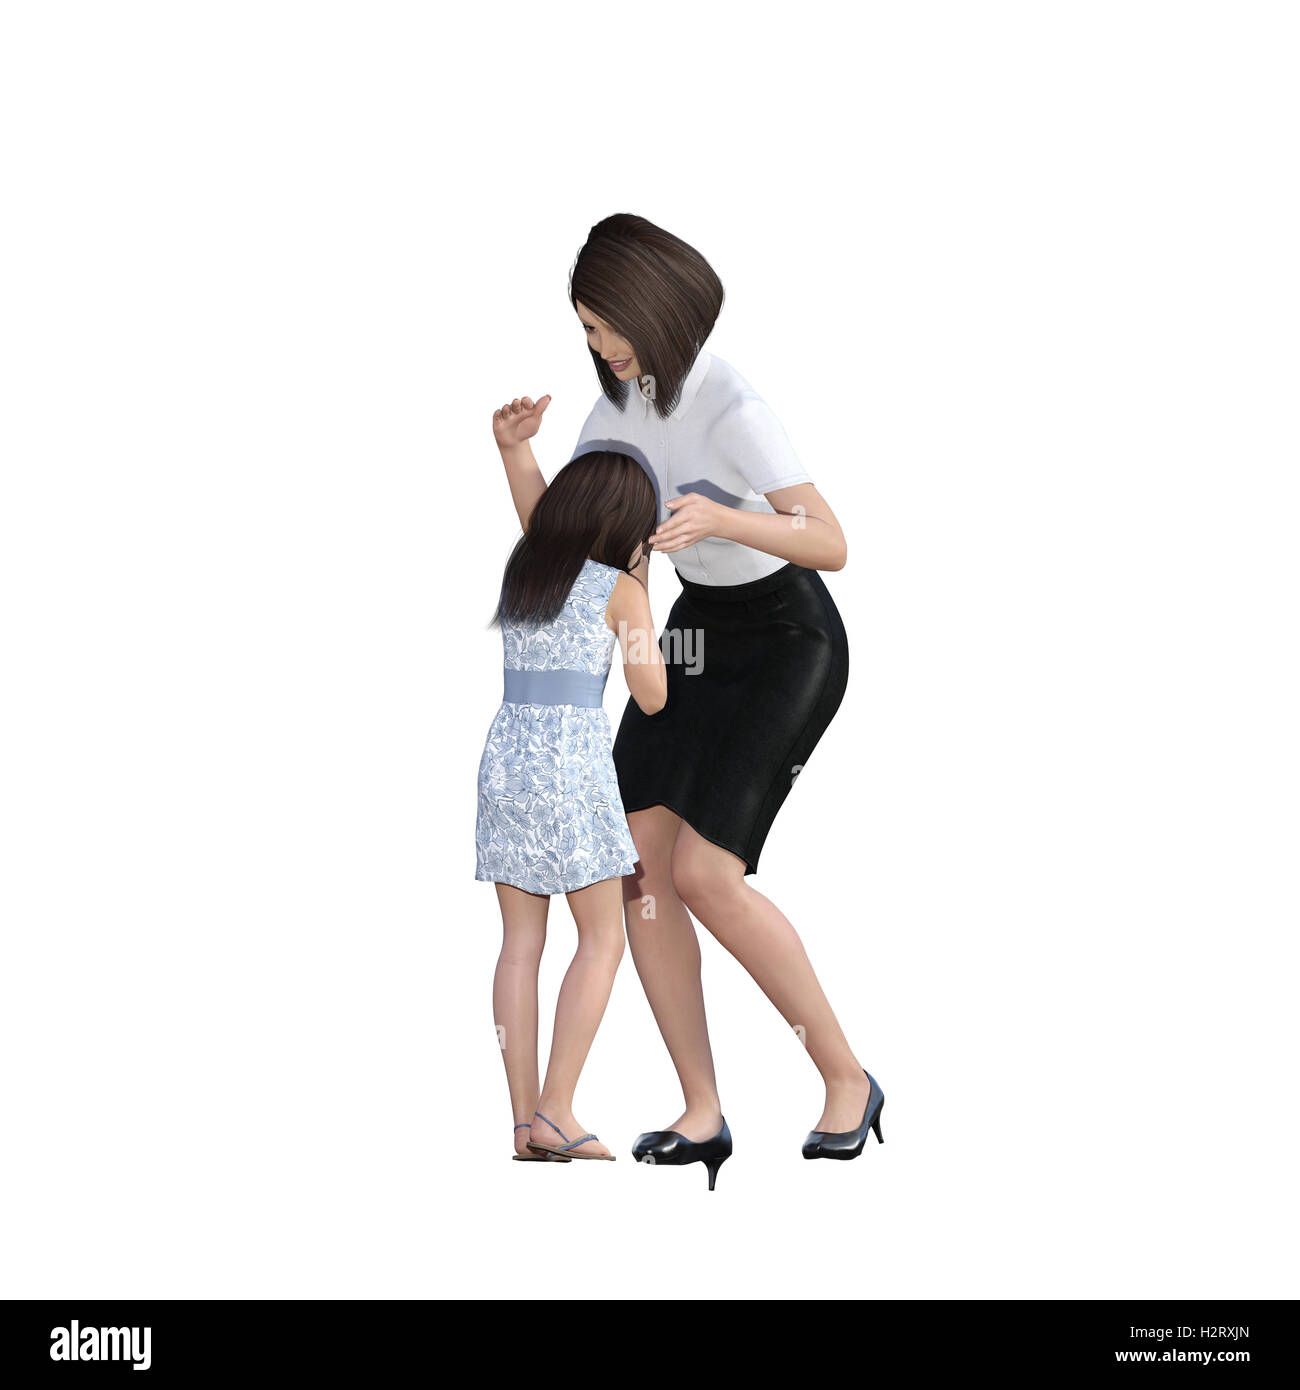 Mother Daughter Interaction of Mom Consoling Girl as an Illustration Concept Stock Photo